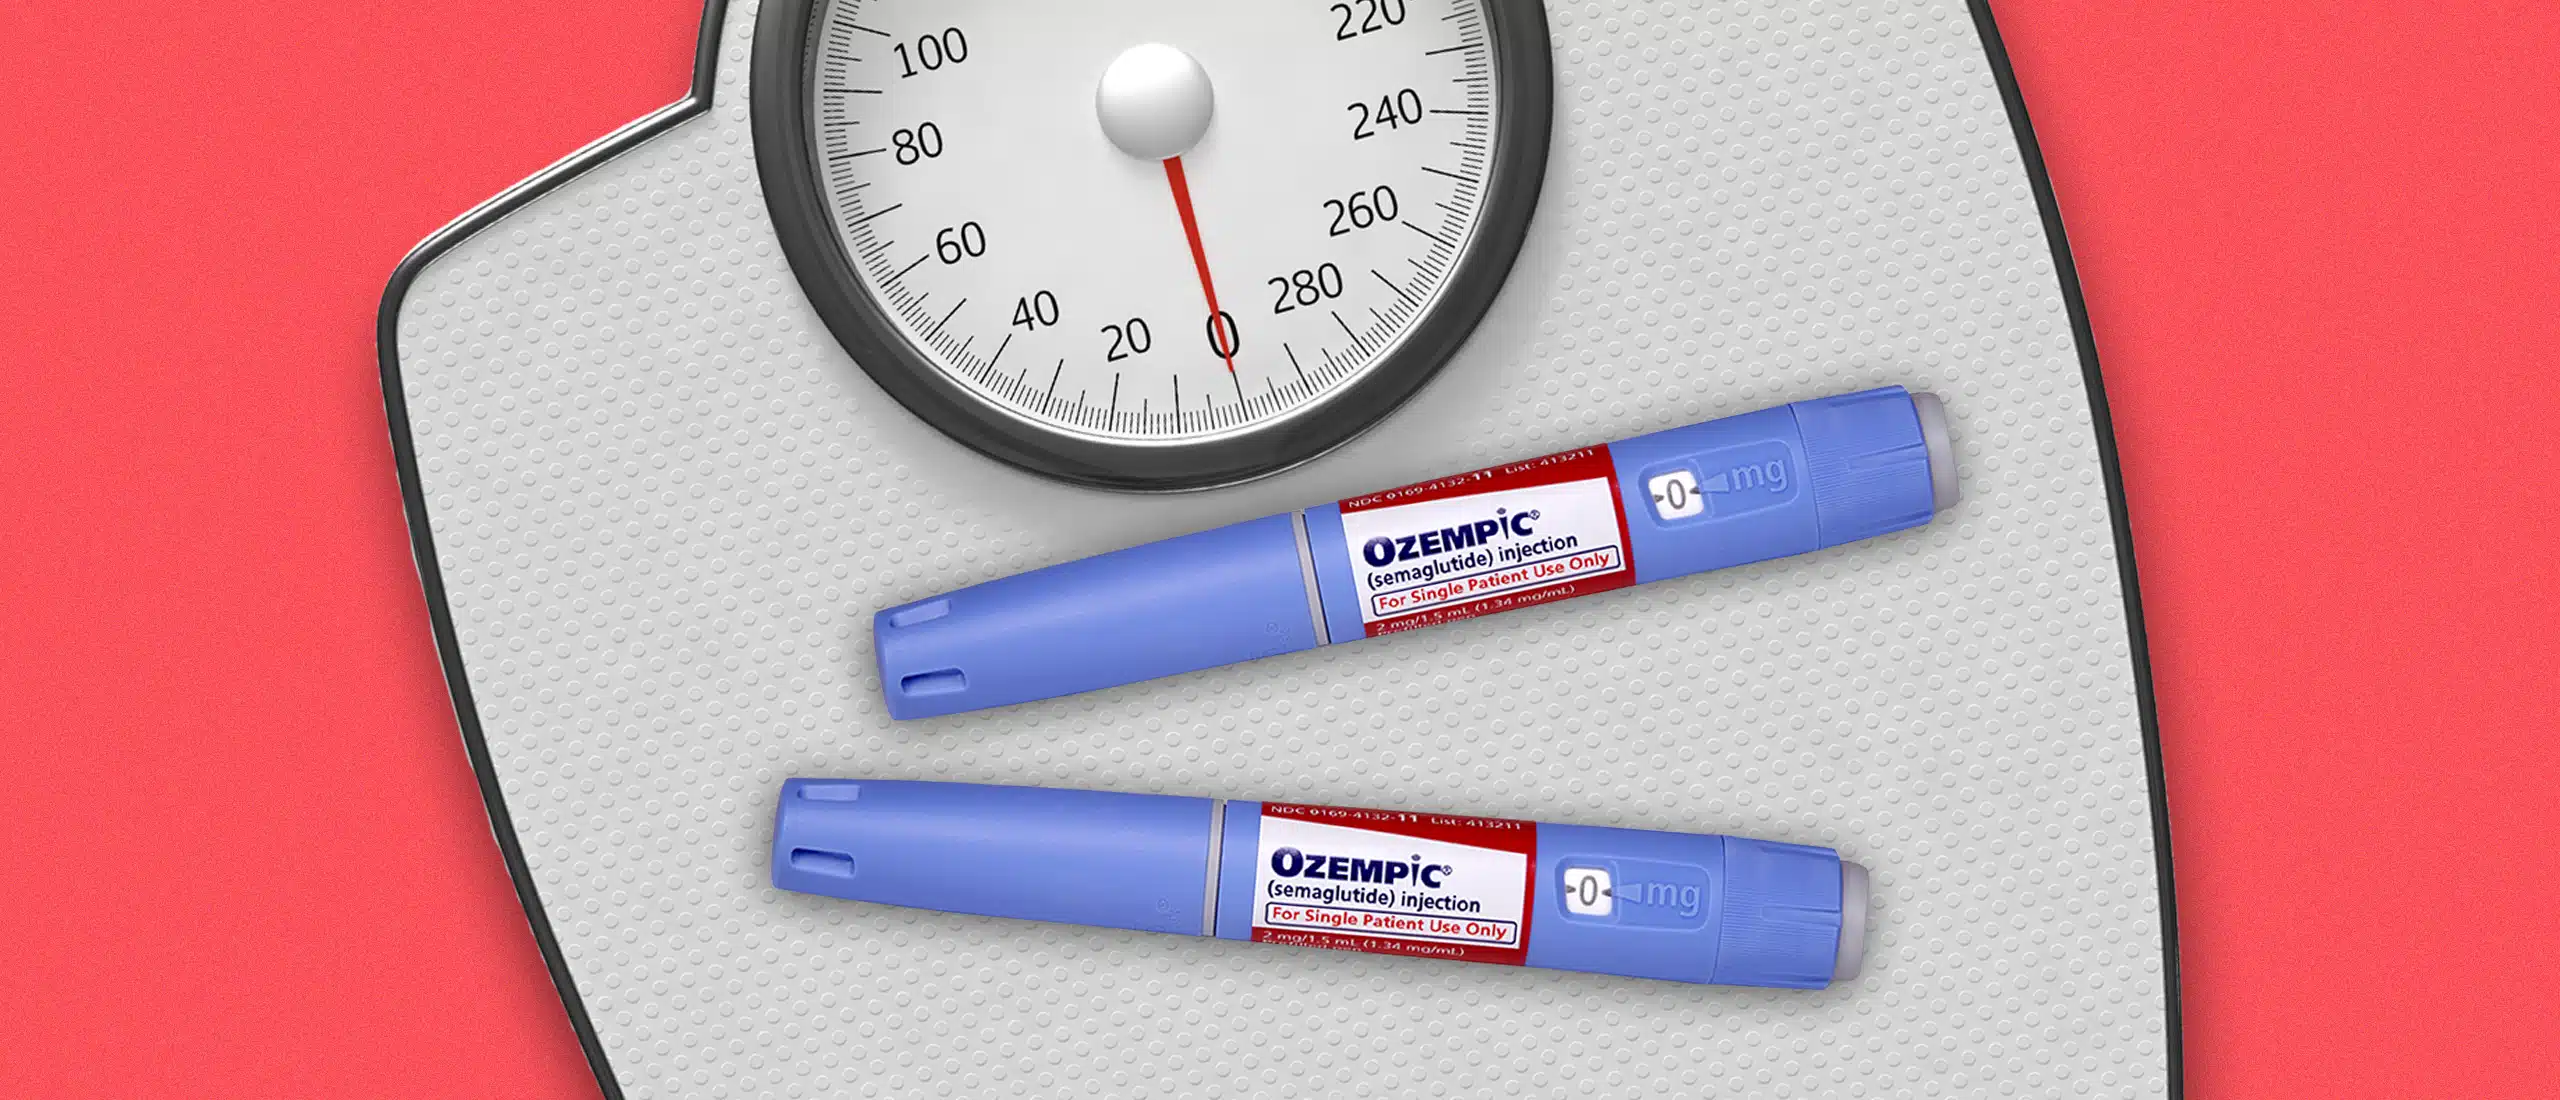 Ozempic injections on weight scale with red background